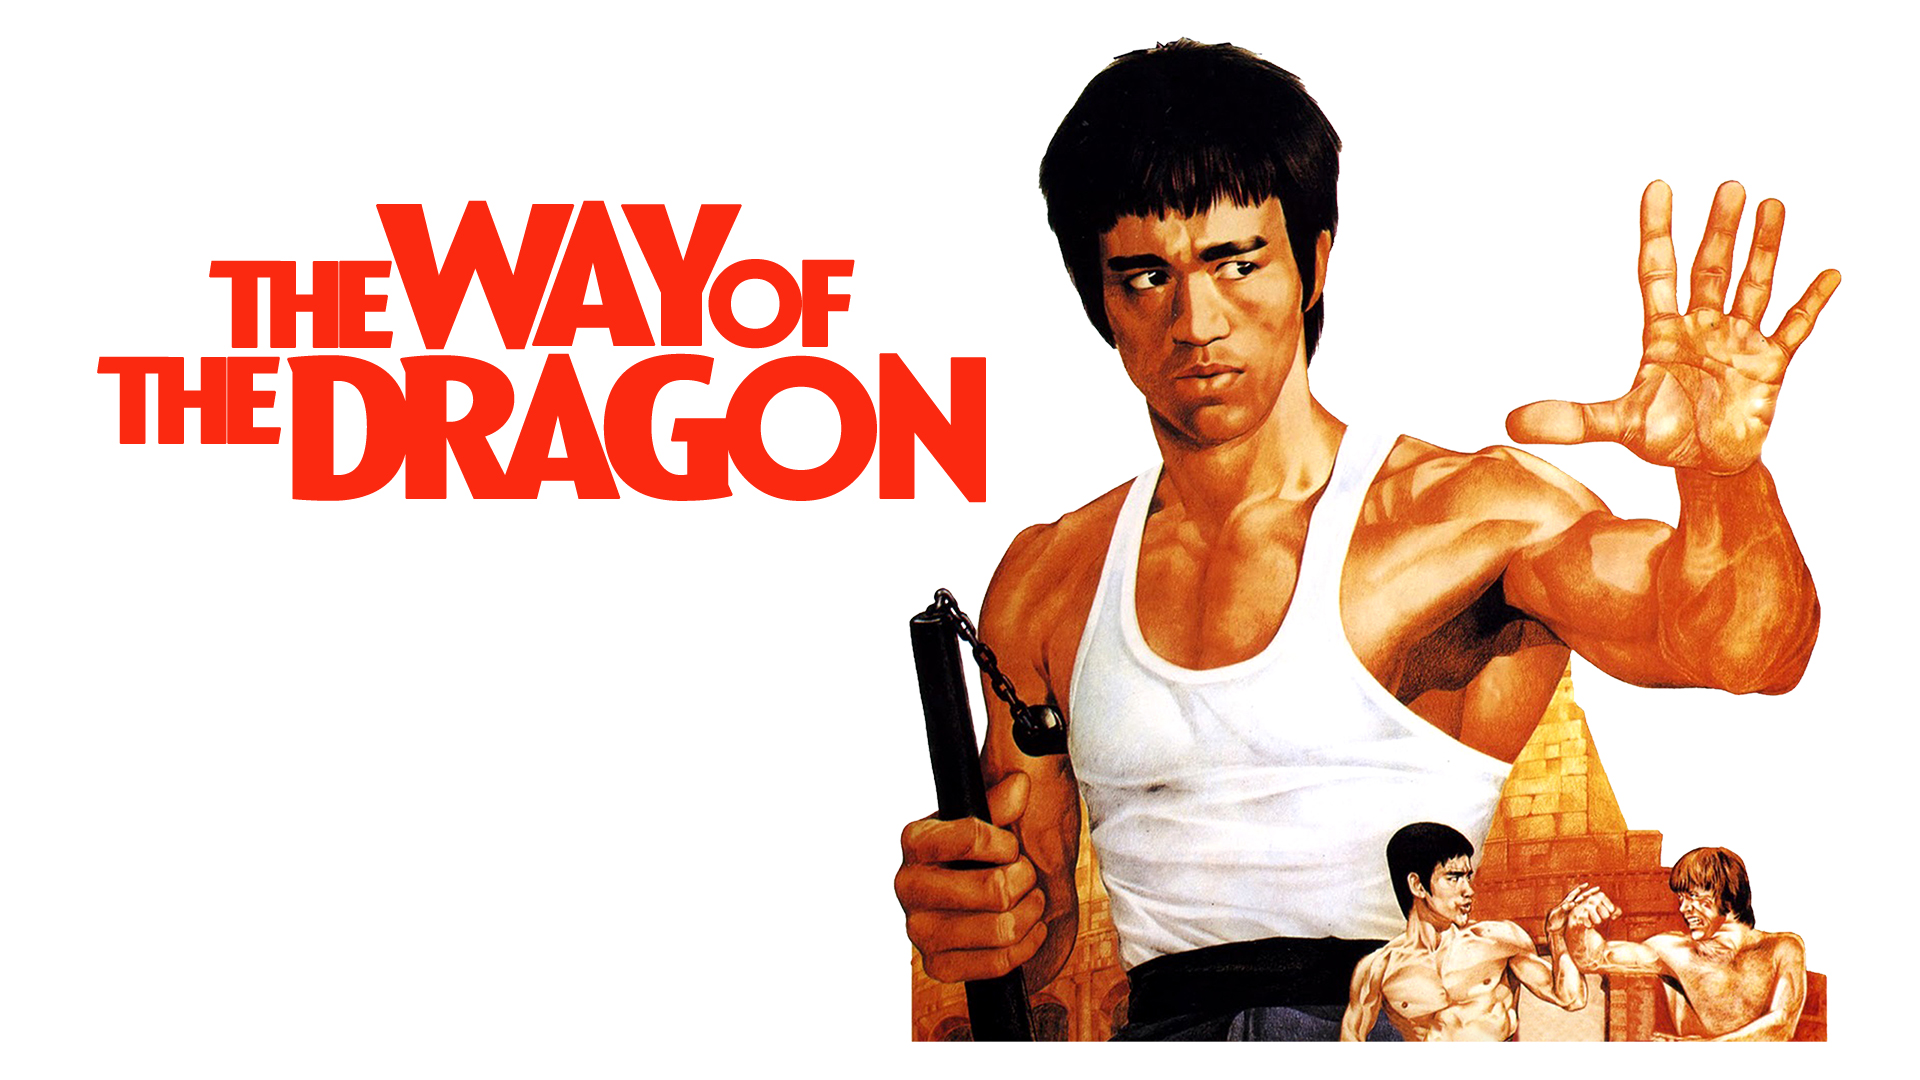 46-facts-about-the-movie-the-way-of-the-dragon